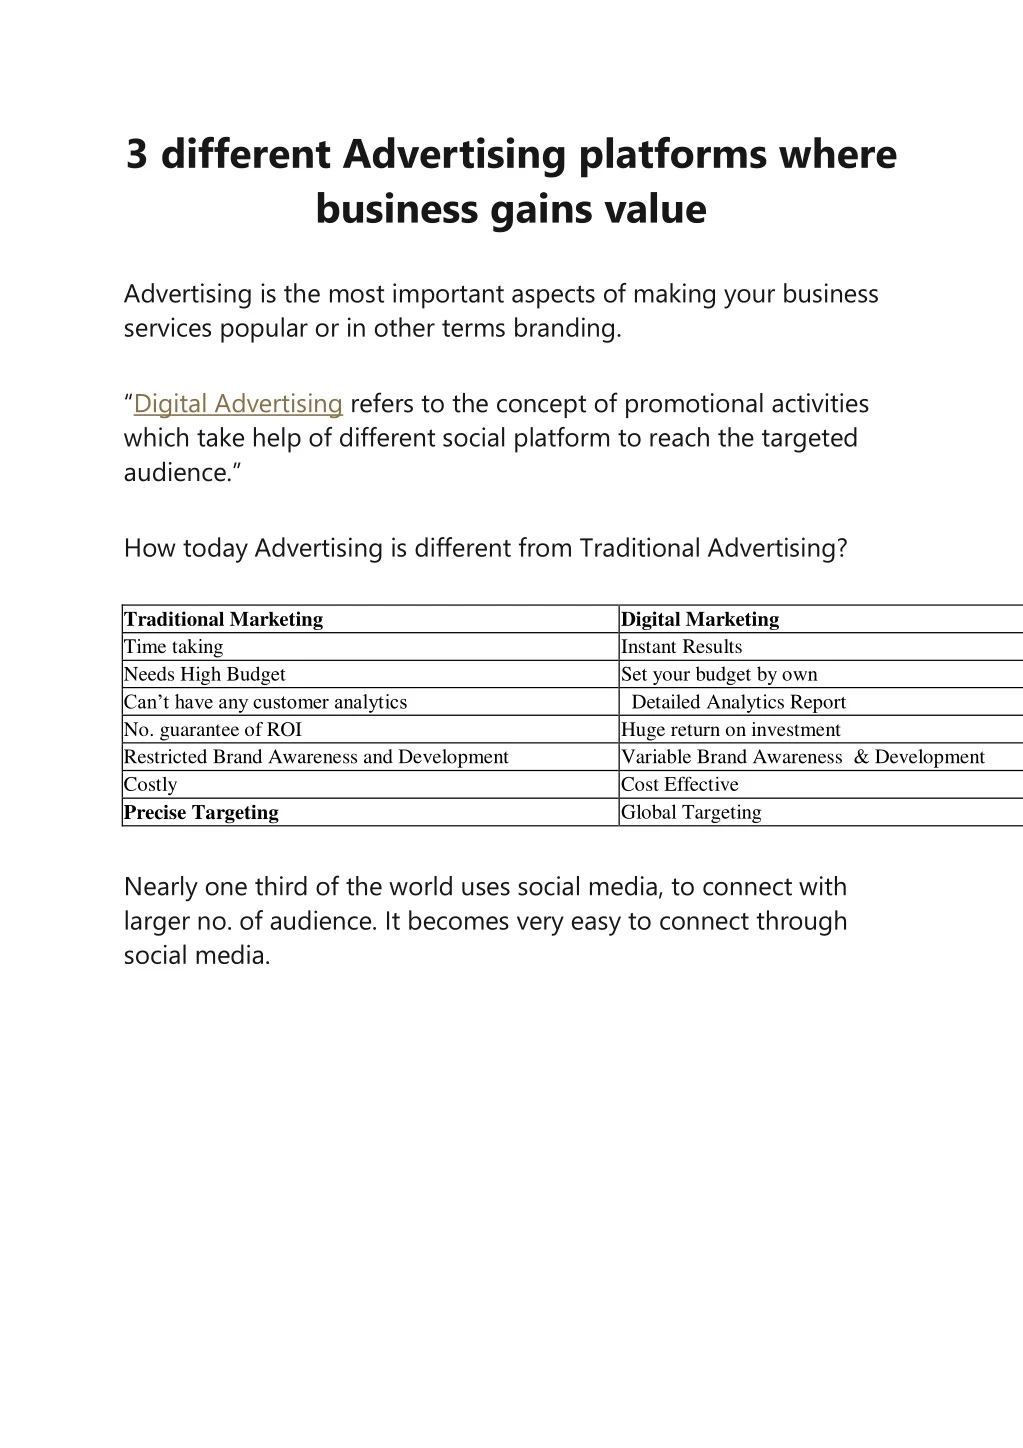 3 different advertising platforms where business